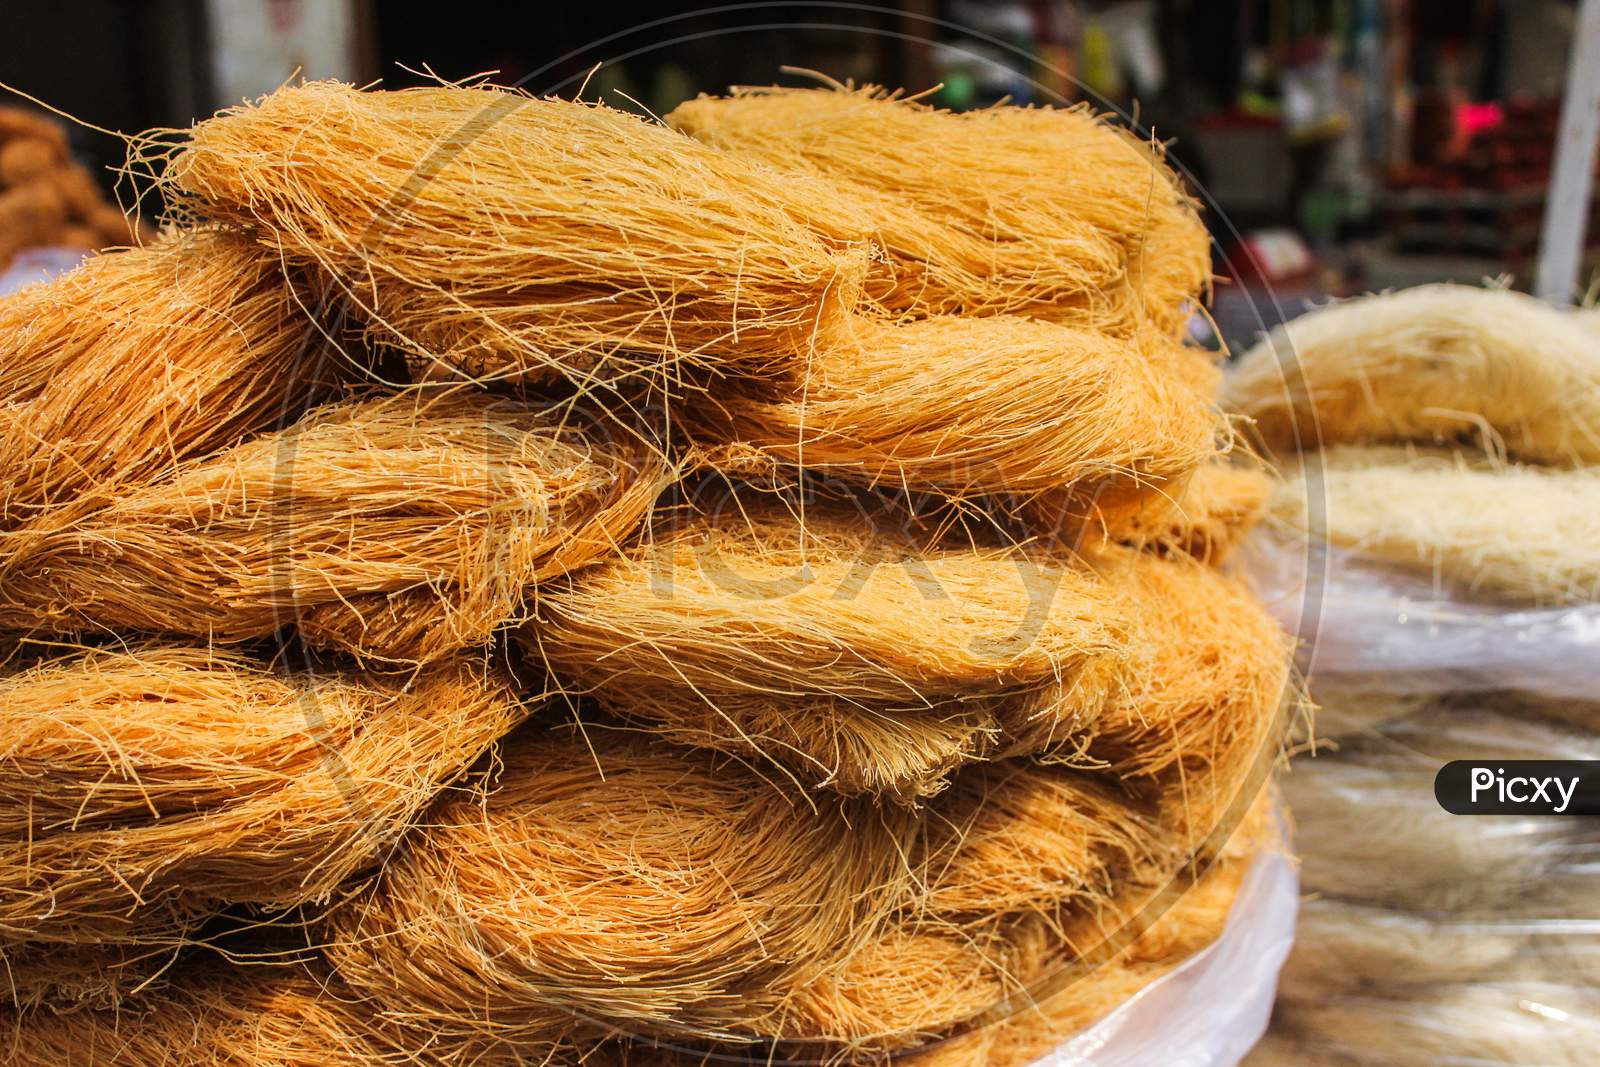 Street Vendors Selling Dried Fruits And Vermicelli At A Market On The Eve Of The Holy Month Of Ramadan In Guwahati, Assam.